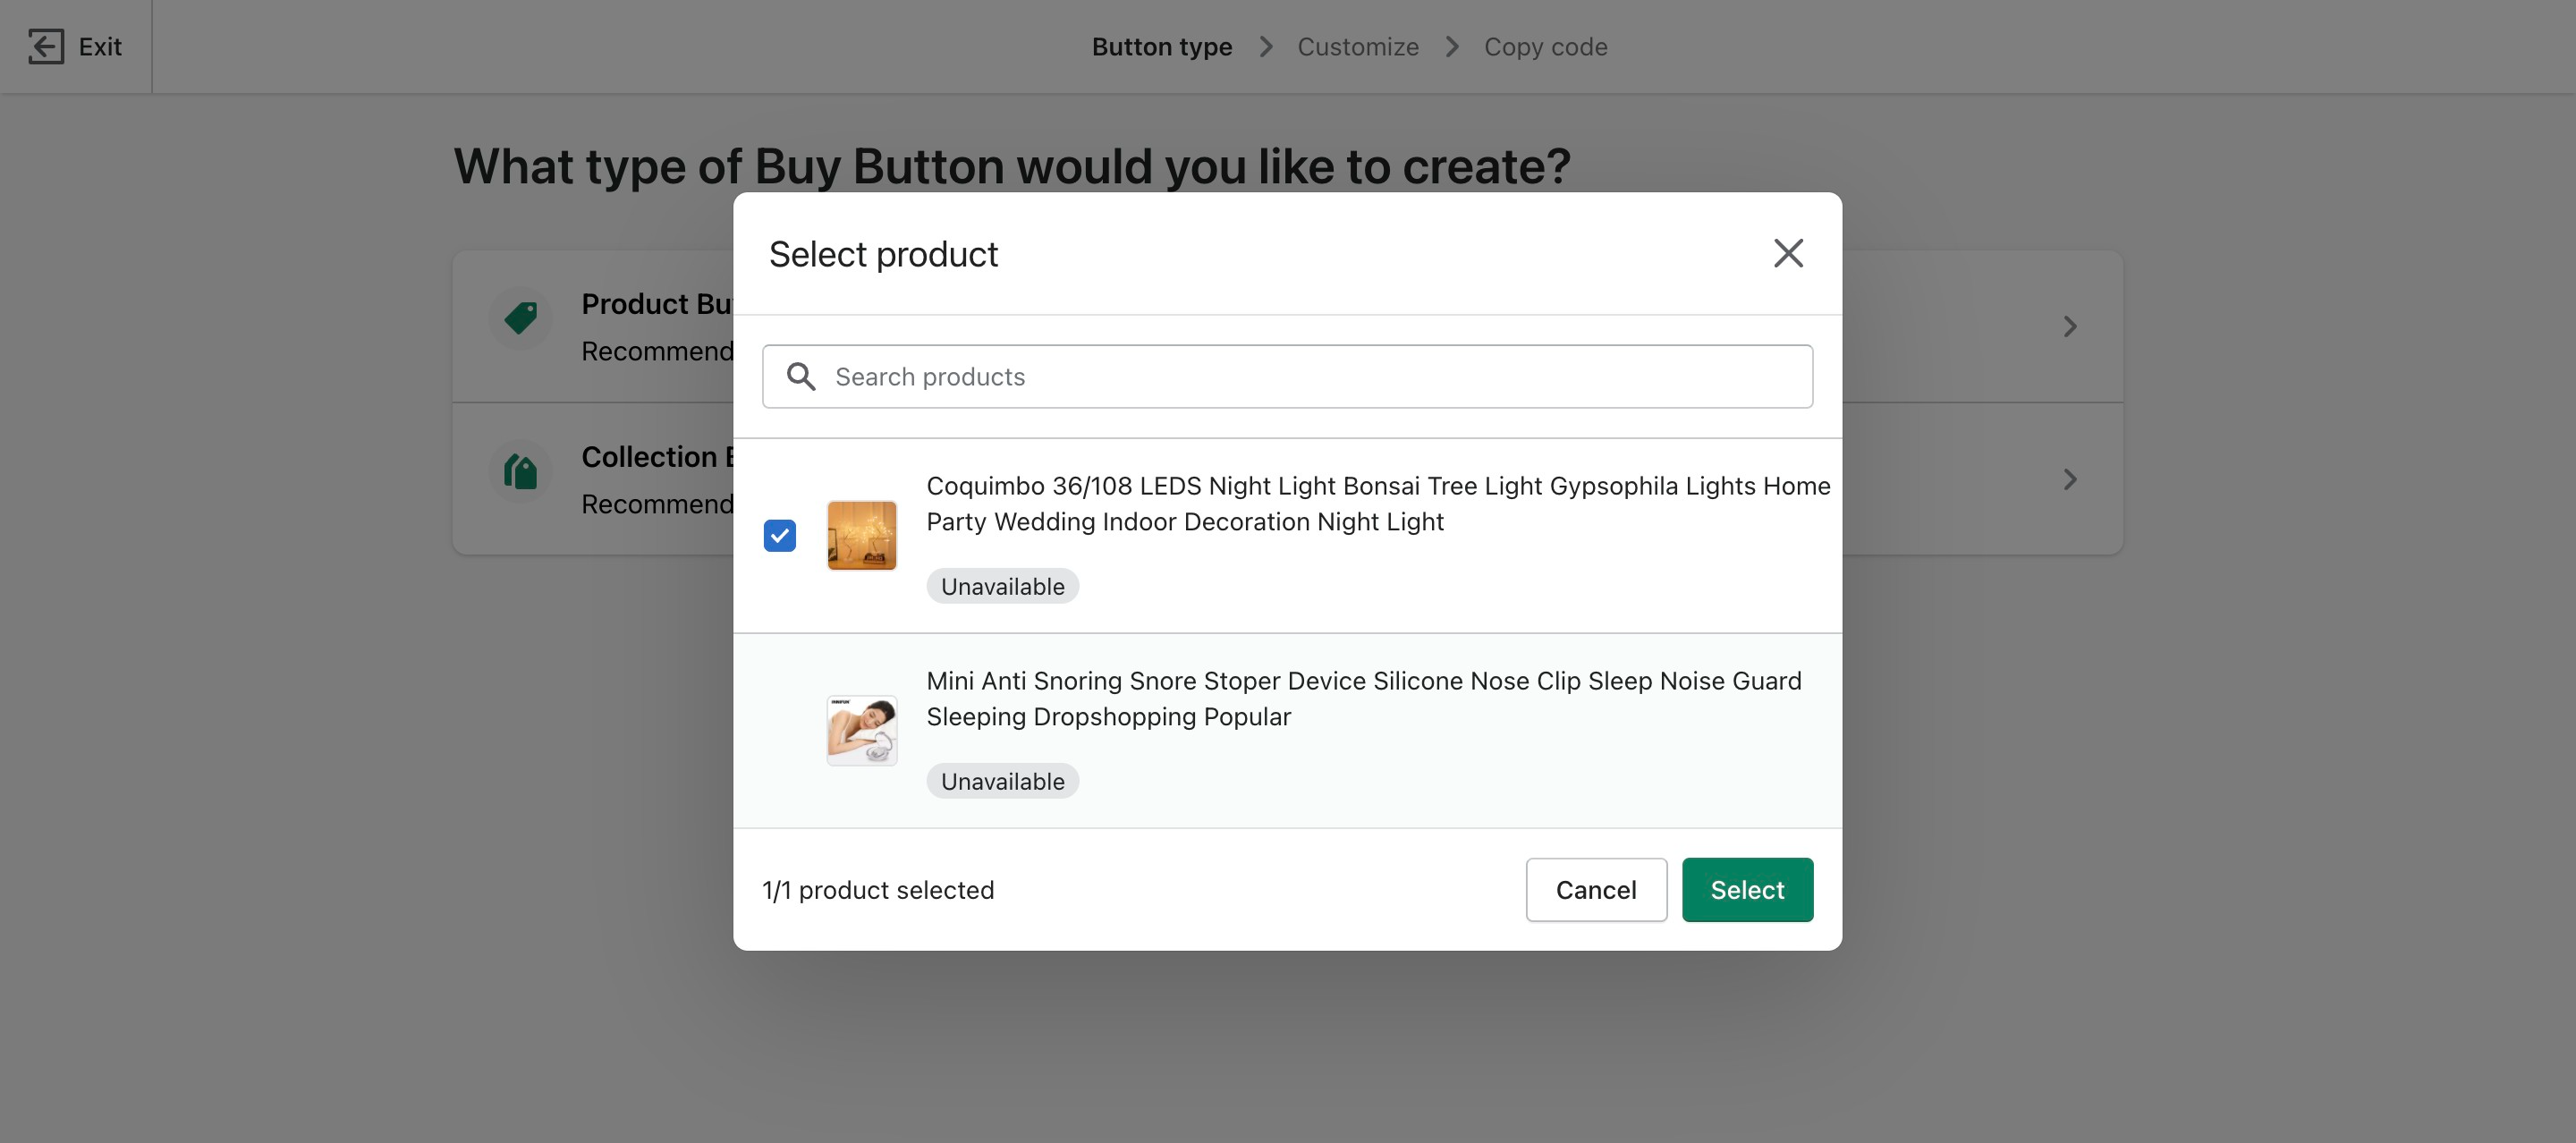 Steps to create a buy button on Shopify